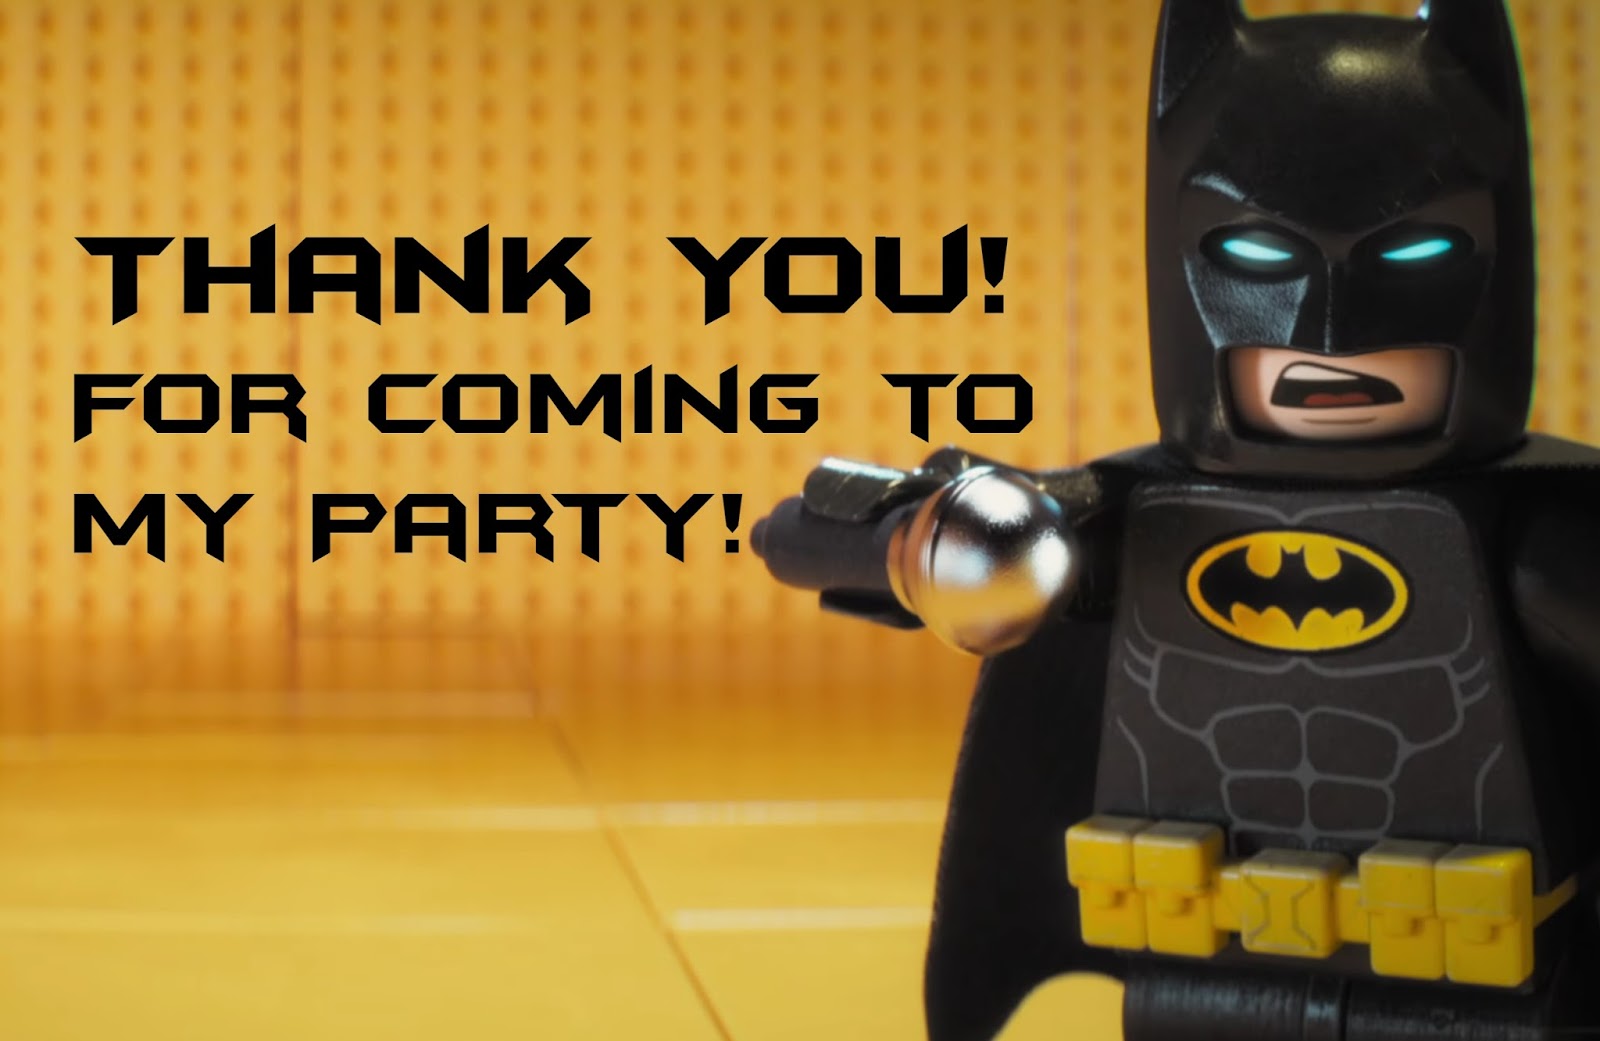 Musings Of An Average Mom Lego Batman Thank You Cards